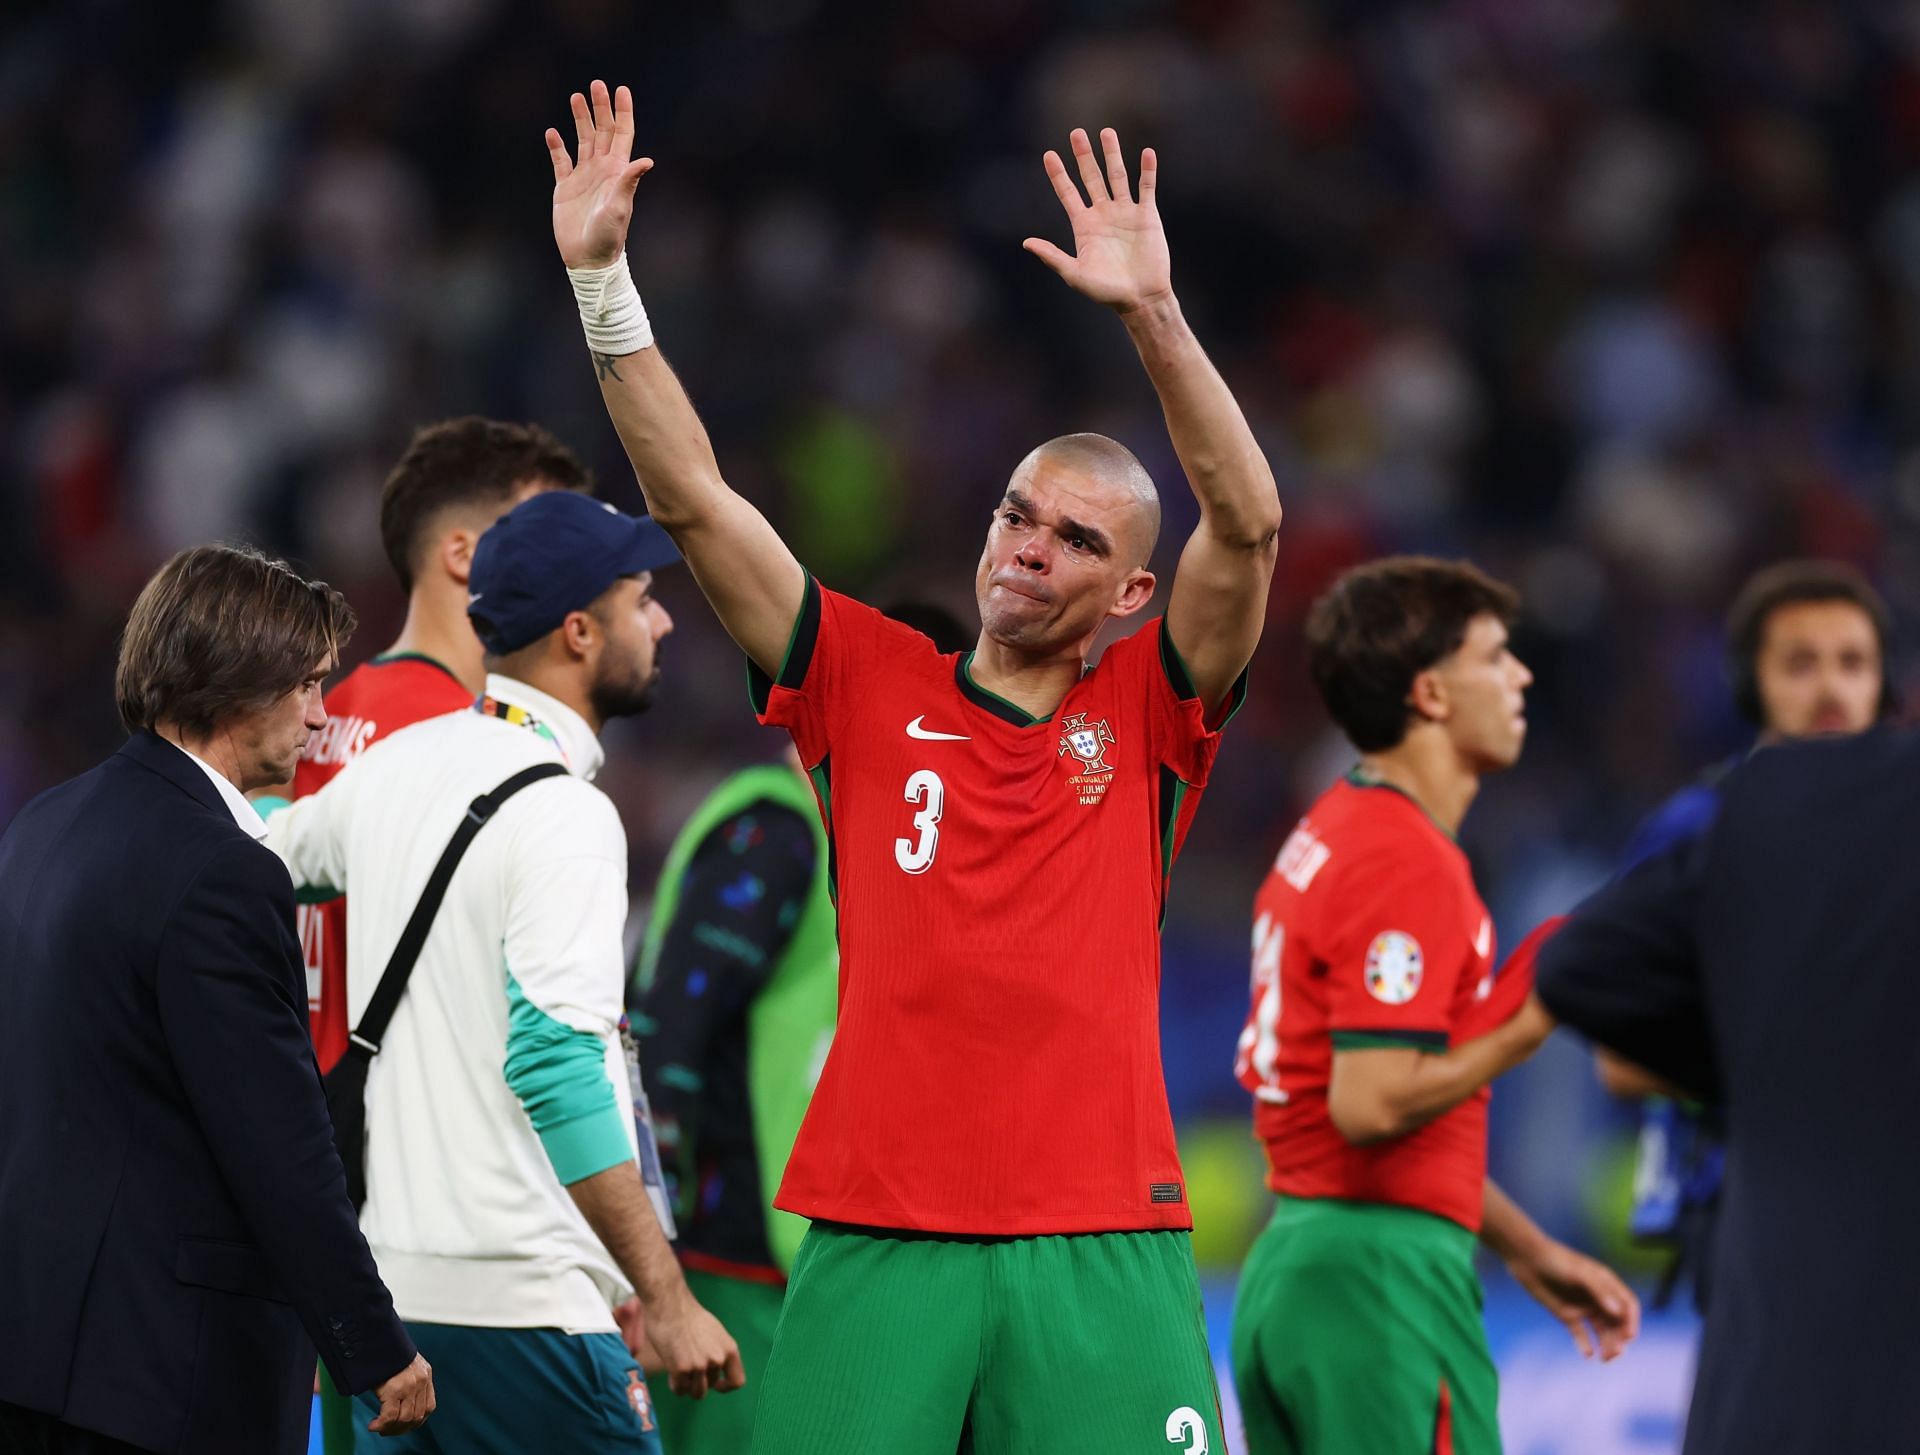 “I have already made my decision” - Portugal star Pepe responds when asked about retirement after emotional Euro 2024 exit to France